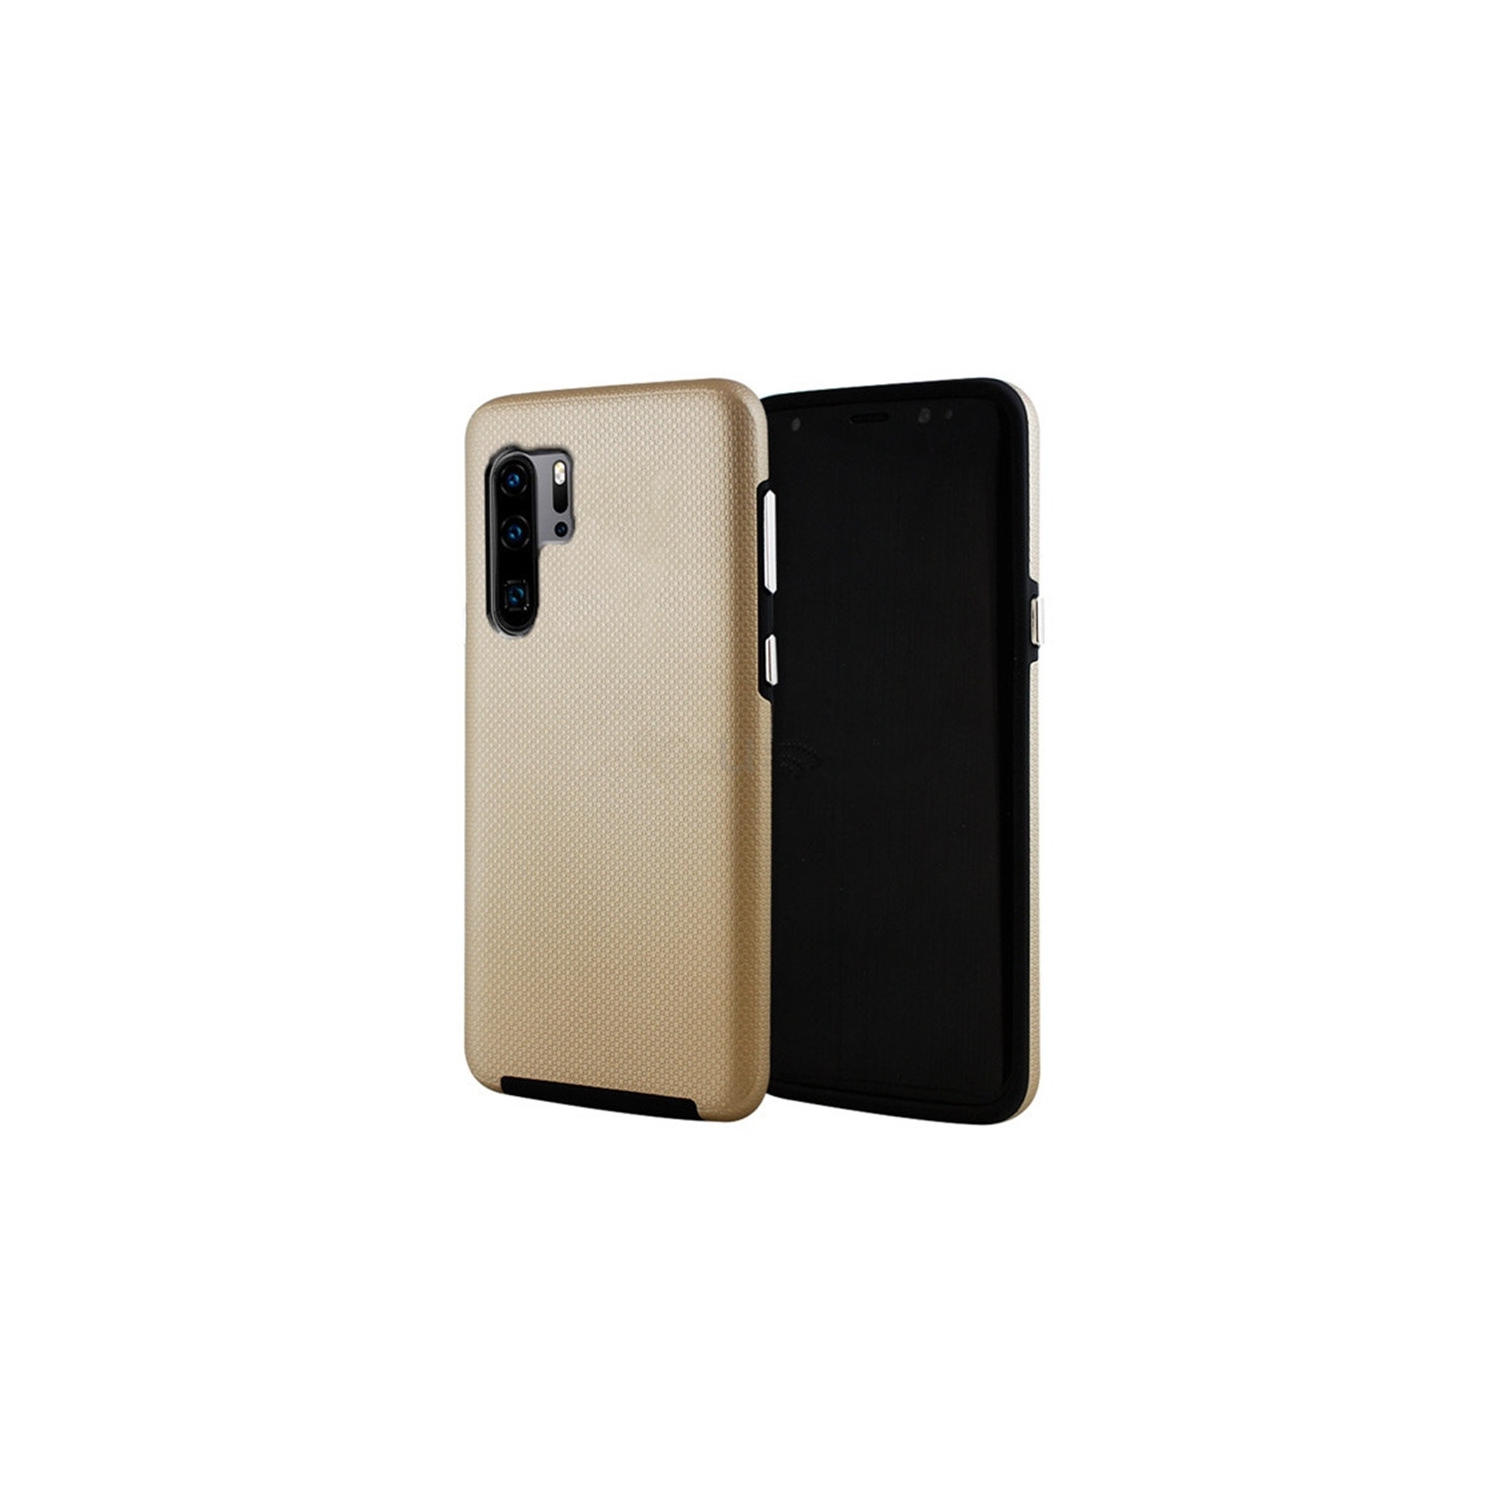 【CSmart】 Slim Fitted Hybrid Hard PC Shell Shockproof Scratch Resistant Case Cover for Samsung Galaxy Note 10 Plus, Gold